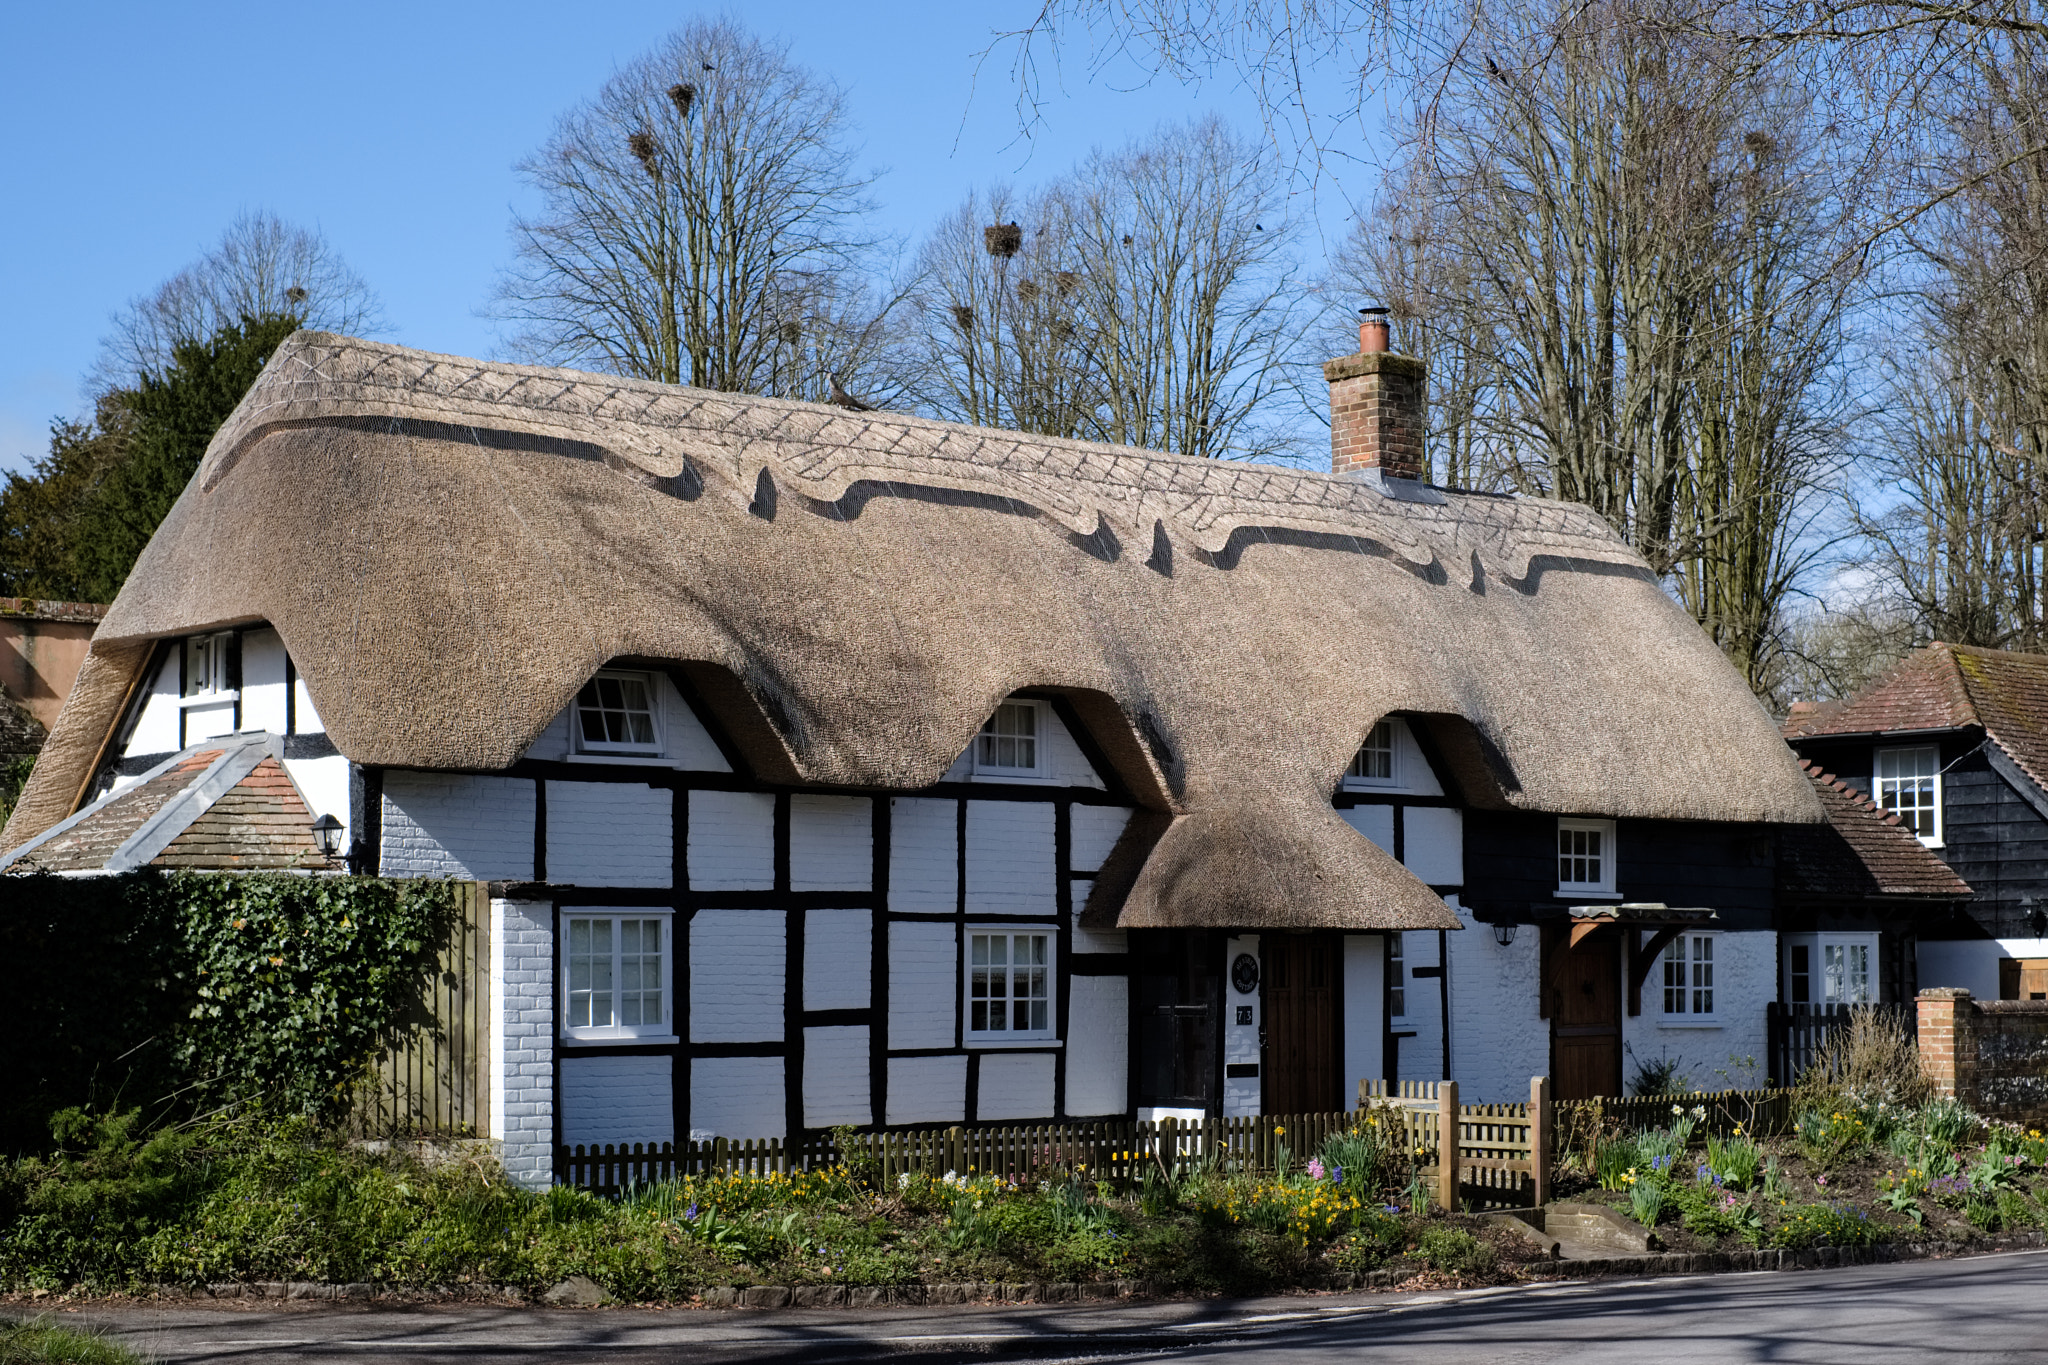 Fujifilm X-T2 sample photo. View of a thatched cottage in micheldever hampshire photography